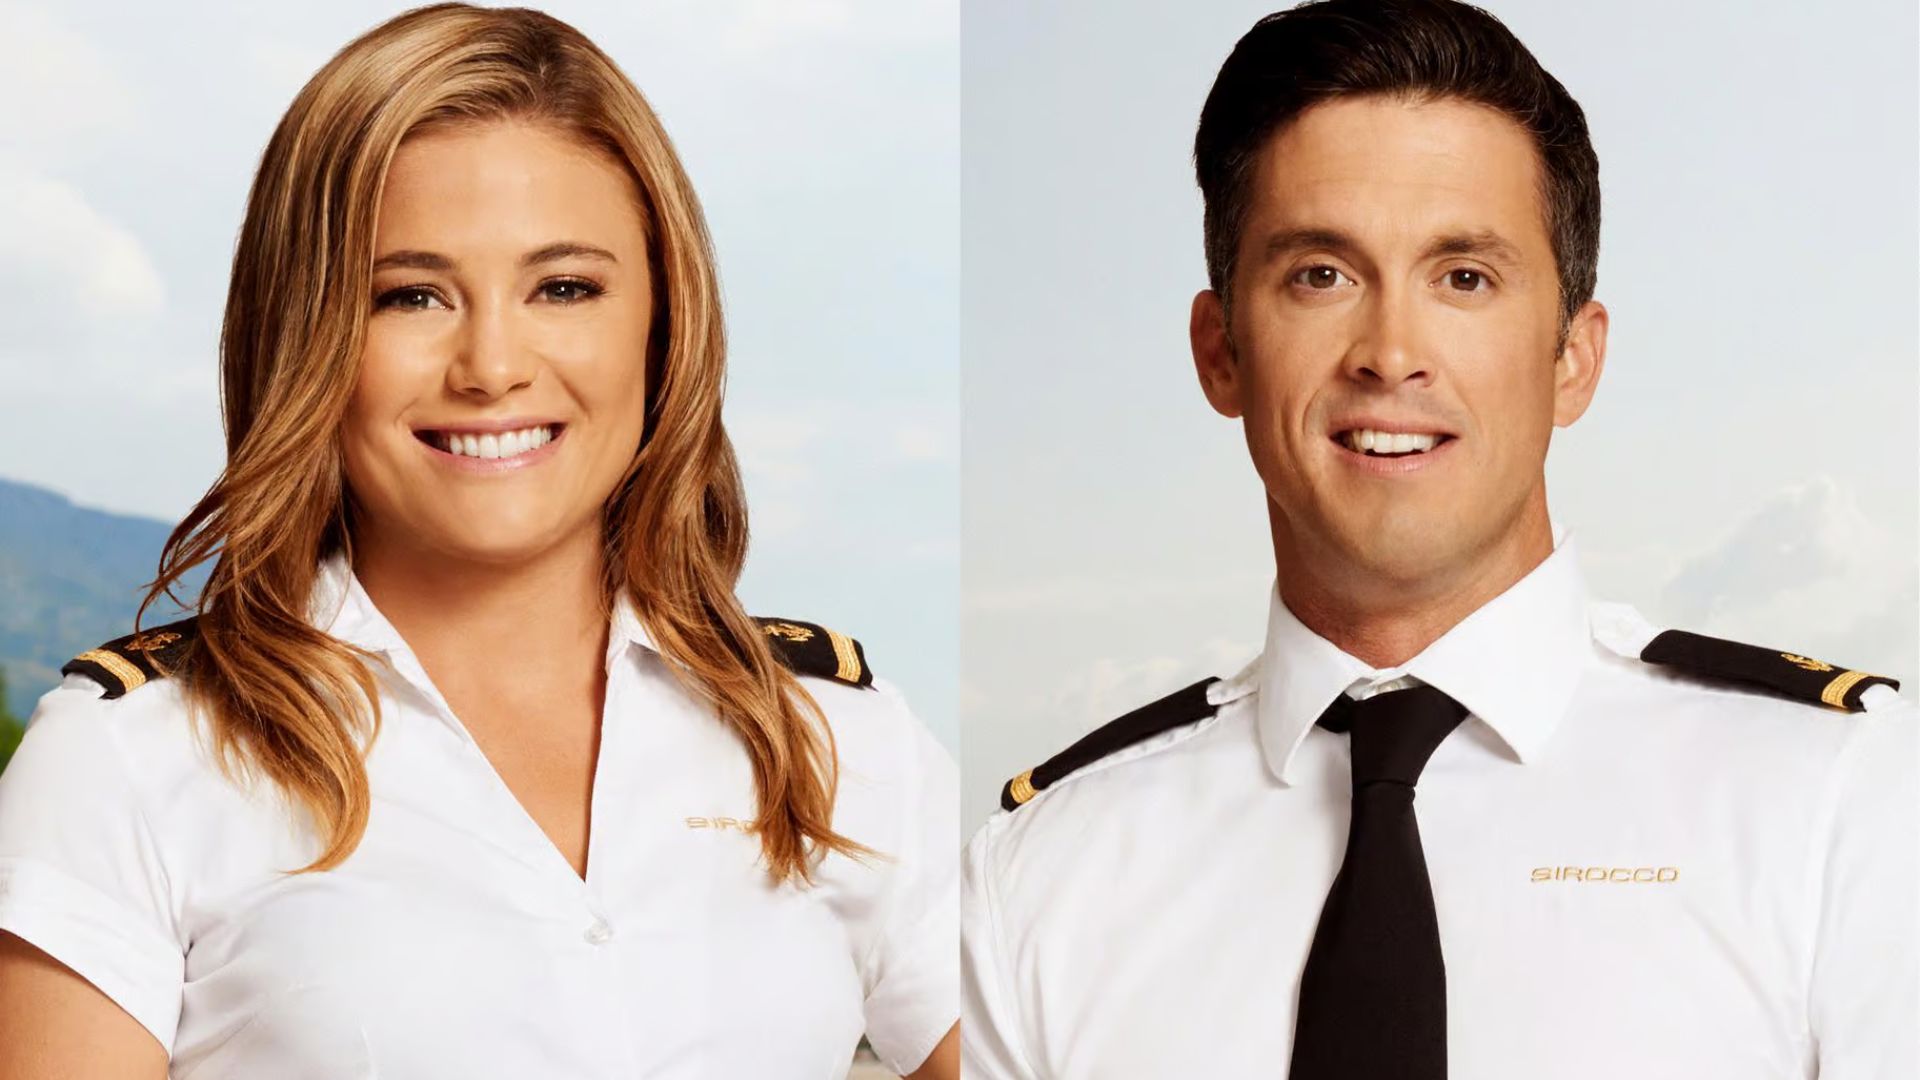 Bobby Giancola And His Girlfriend Both In Pilot Uniform